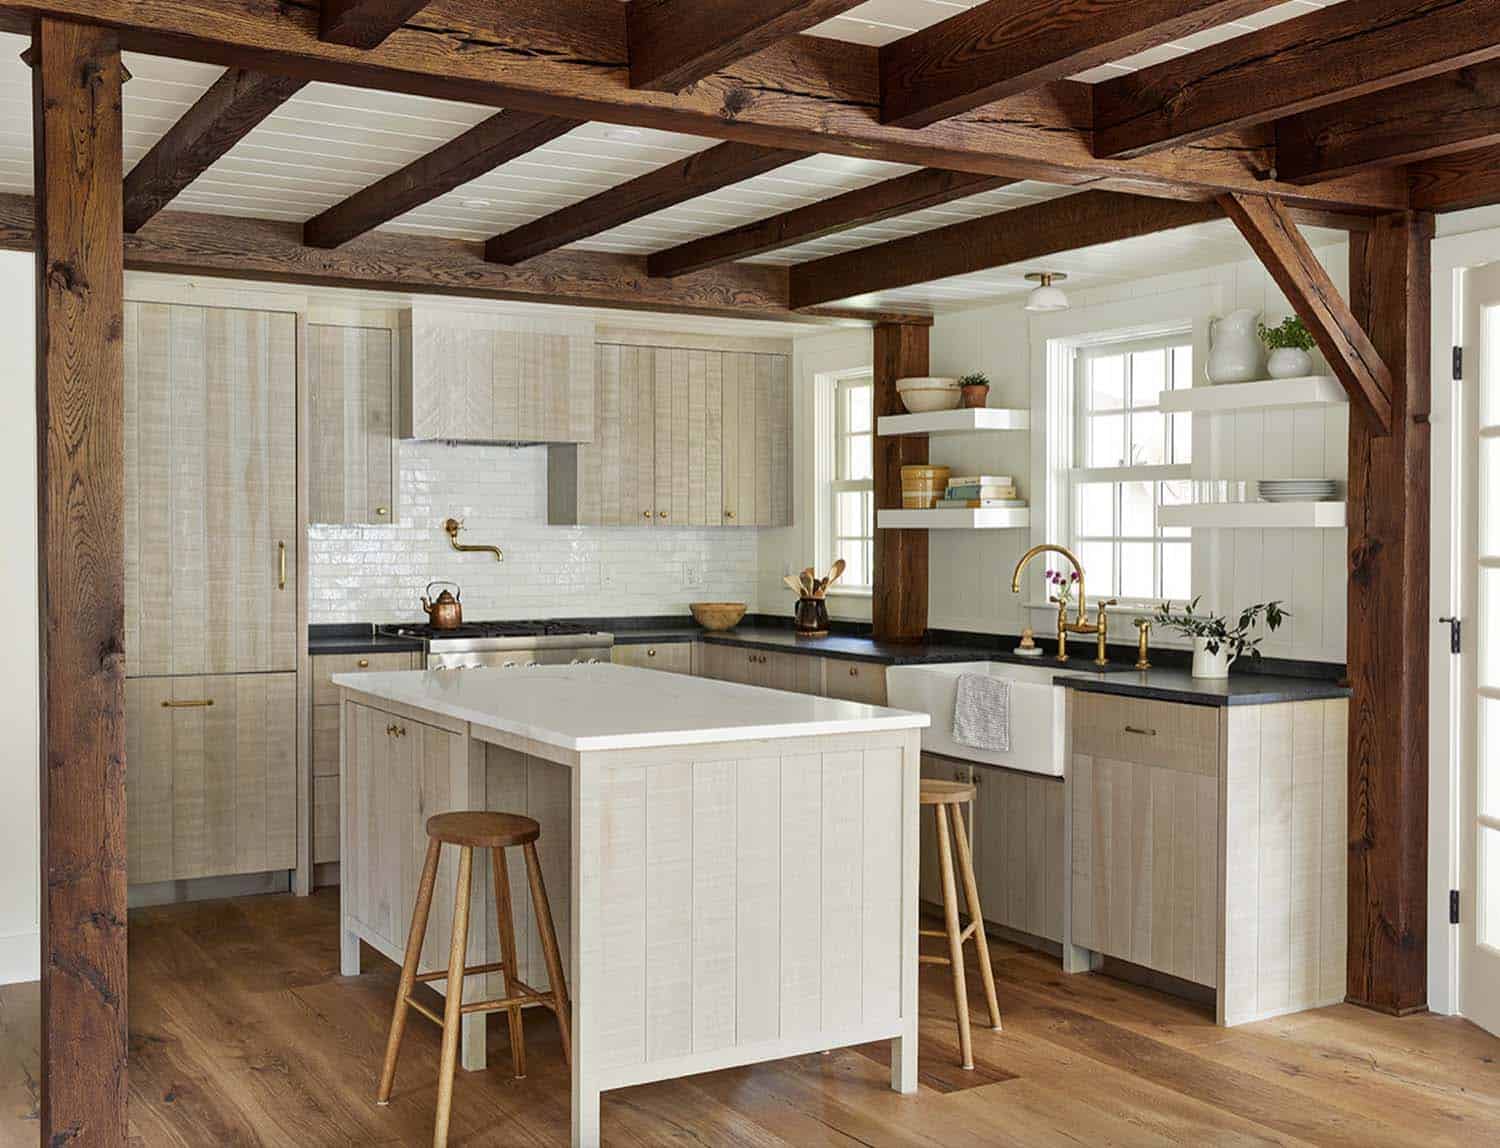 beach style kitchen with wood beams on the ceiling